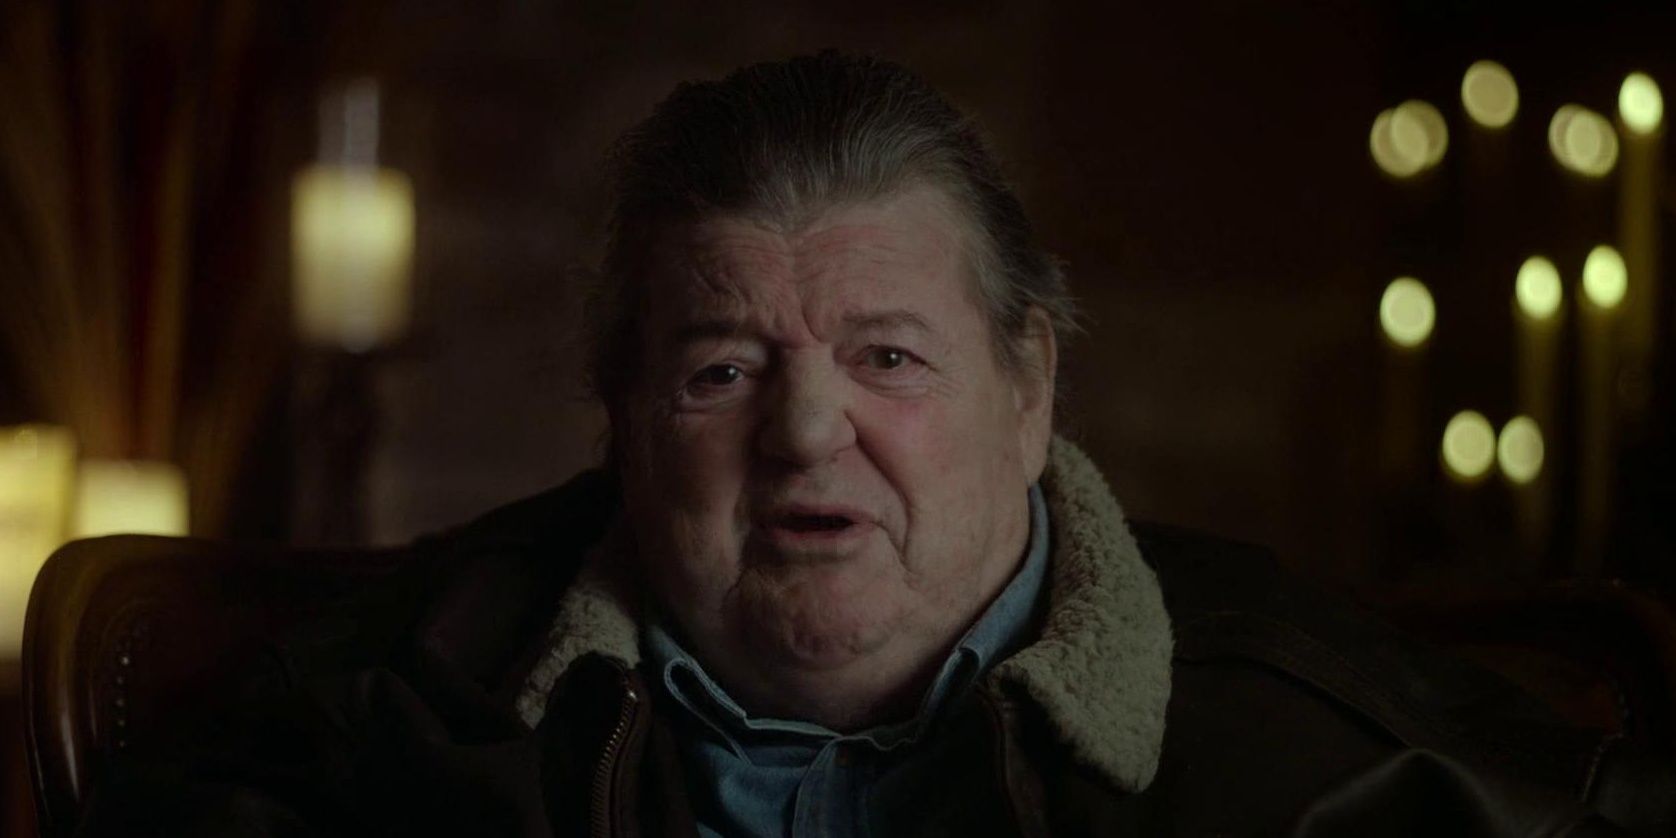 Robbie Coltrane is sitting in front of a candle-lit background at Hogwarts.